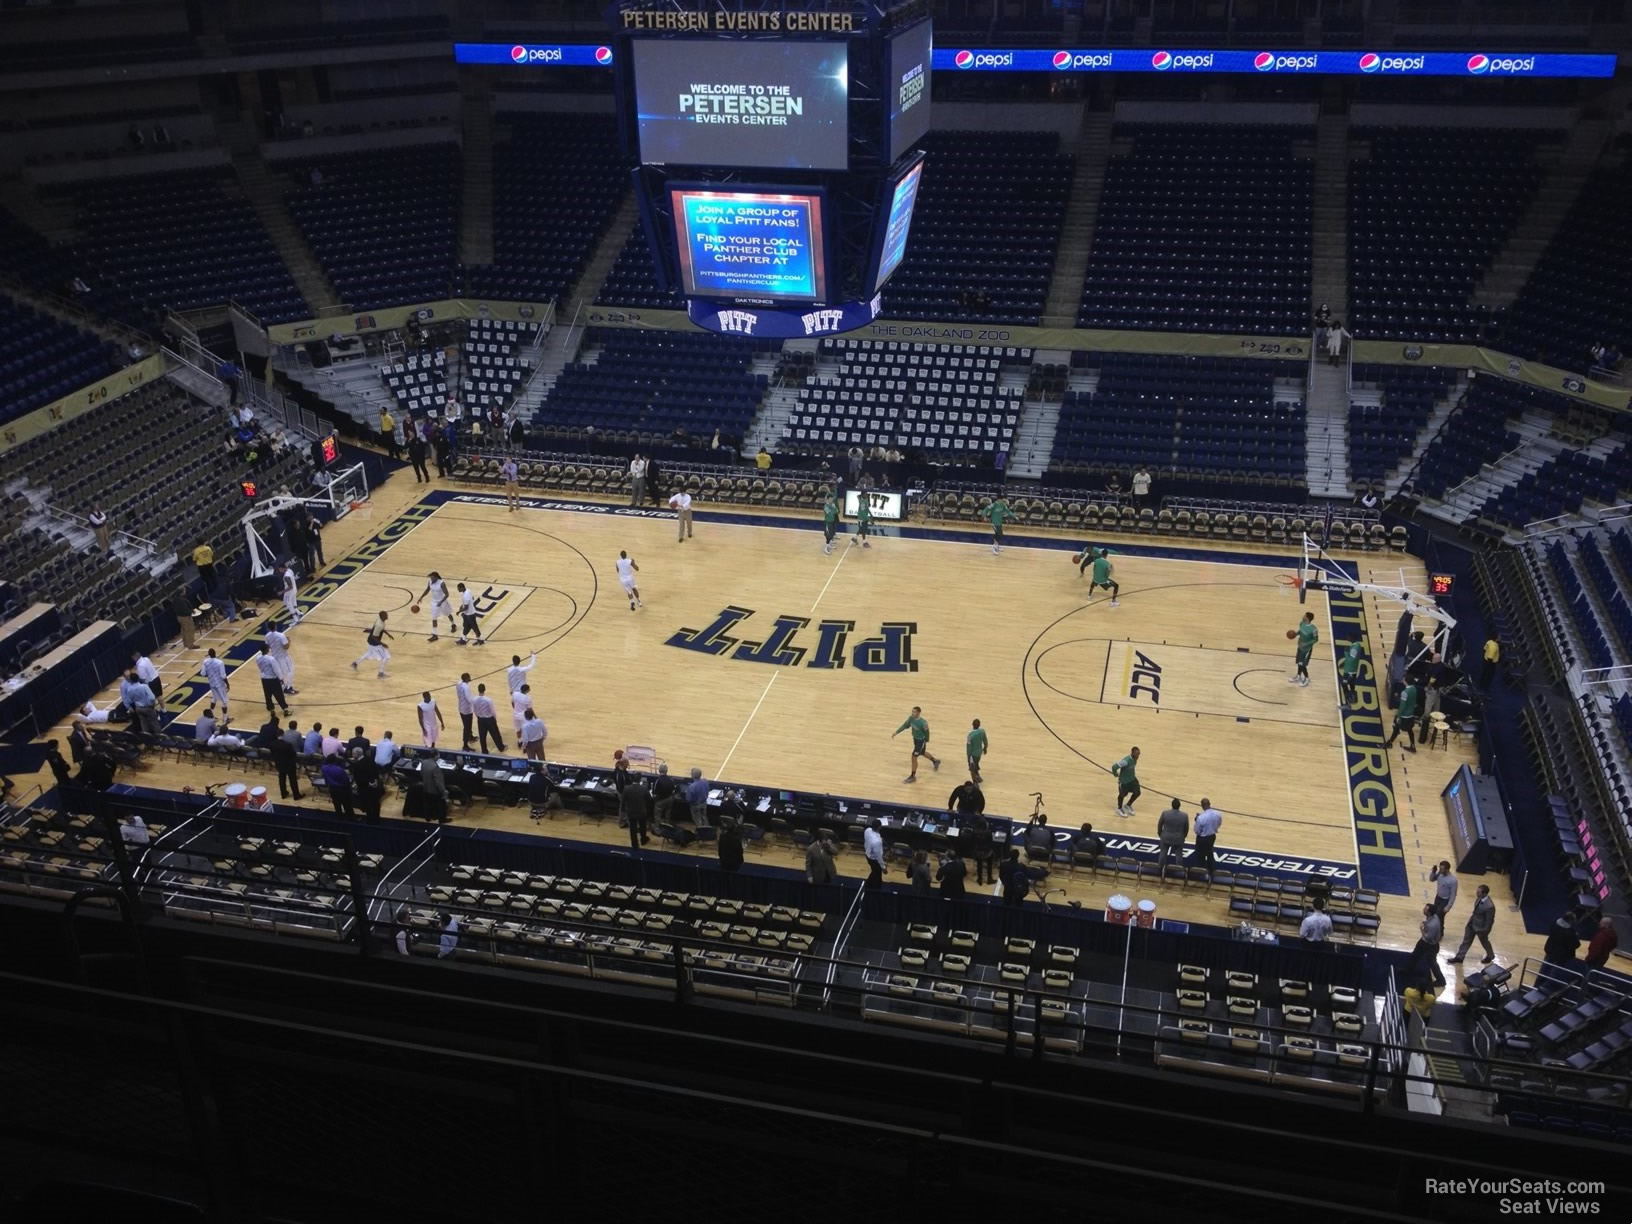 section 220, row f seat view  - petersen events center